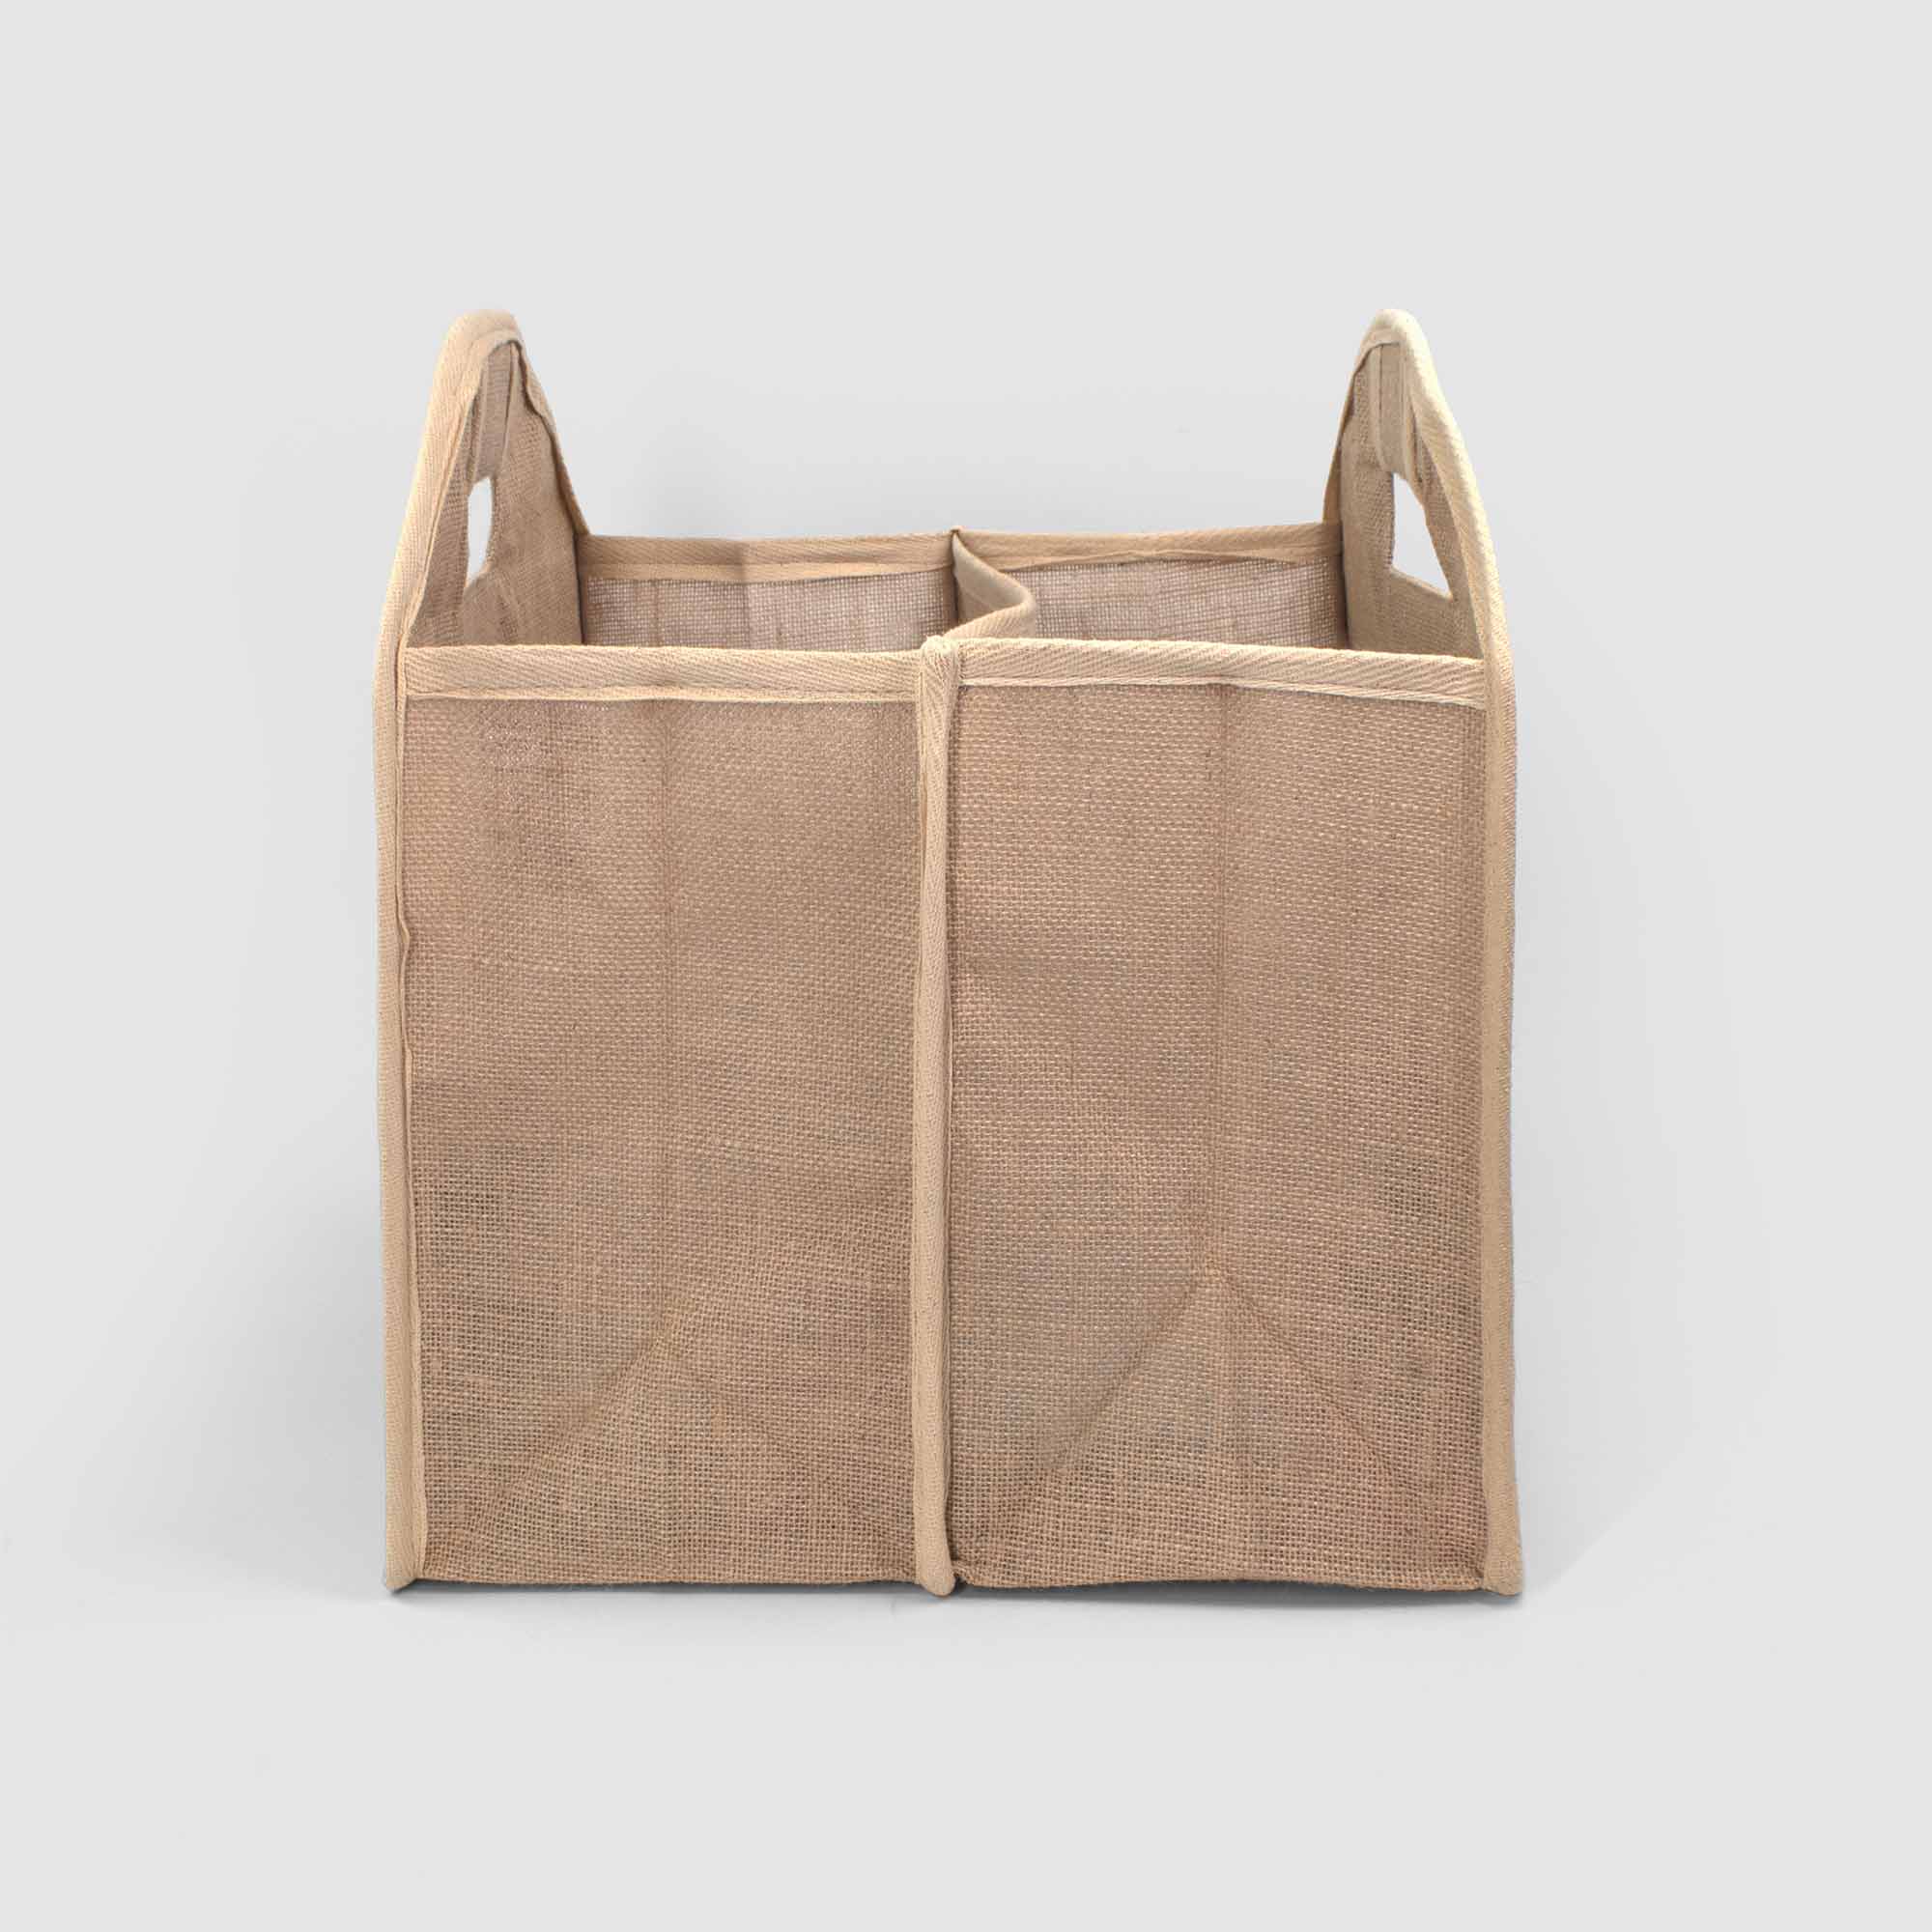 Inhome Collapsible Jute Bag Organiser 2 Section